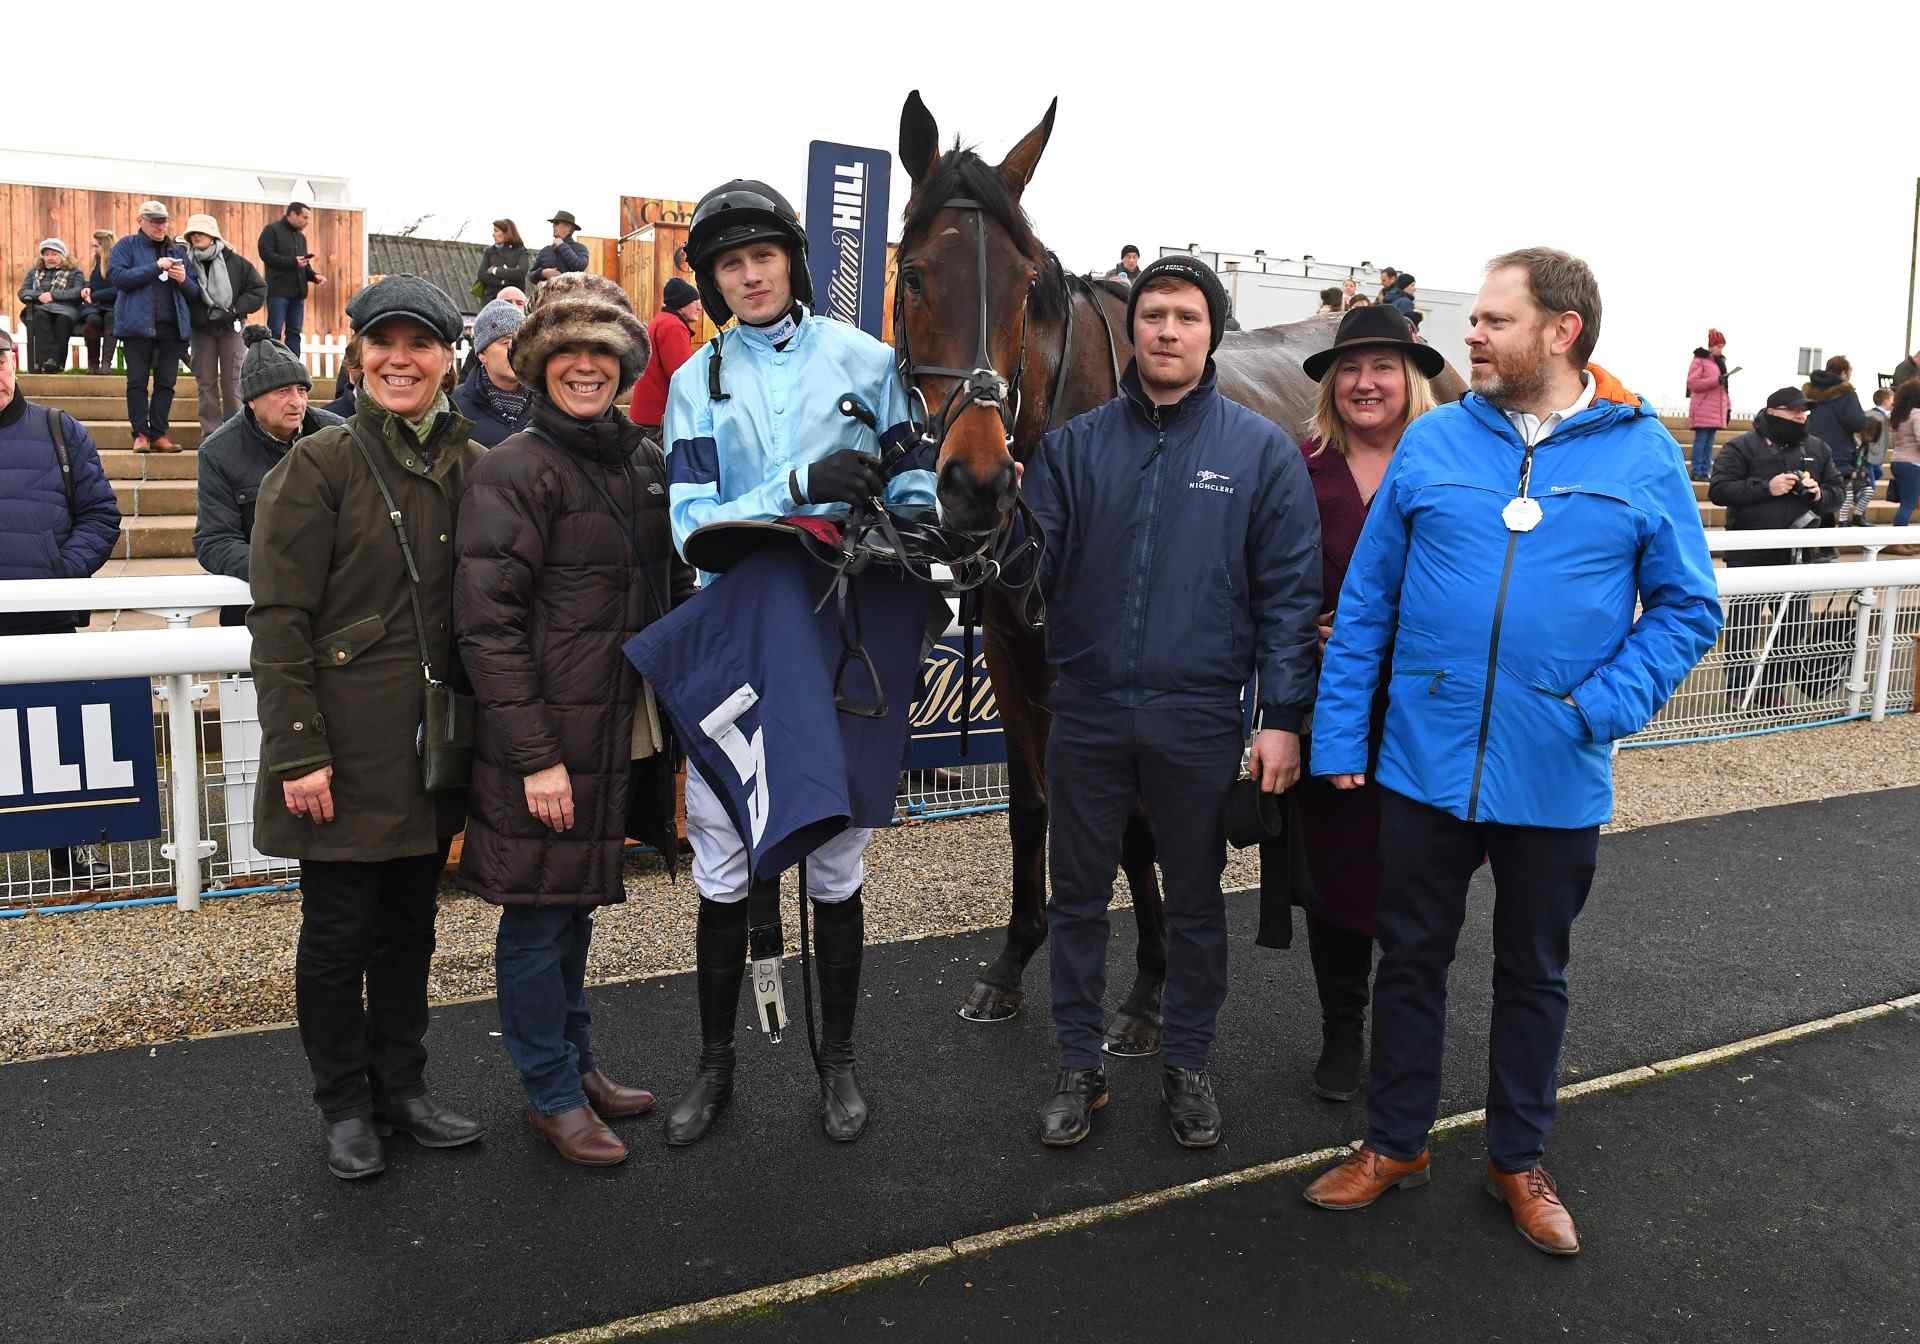 Mount Tempest and owners in the winners enclosure at Wetherby